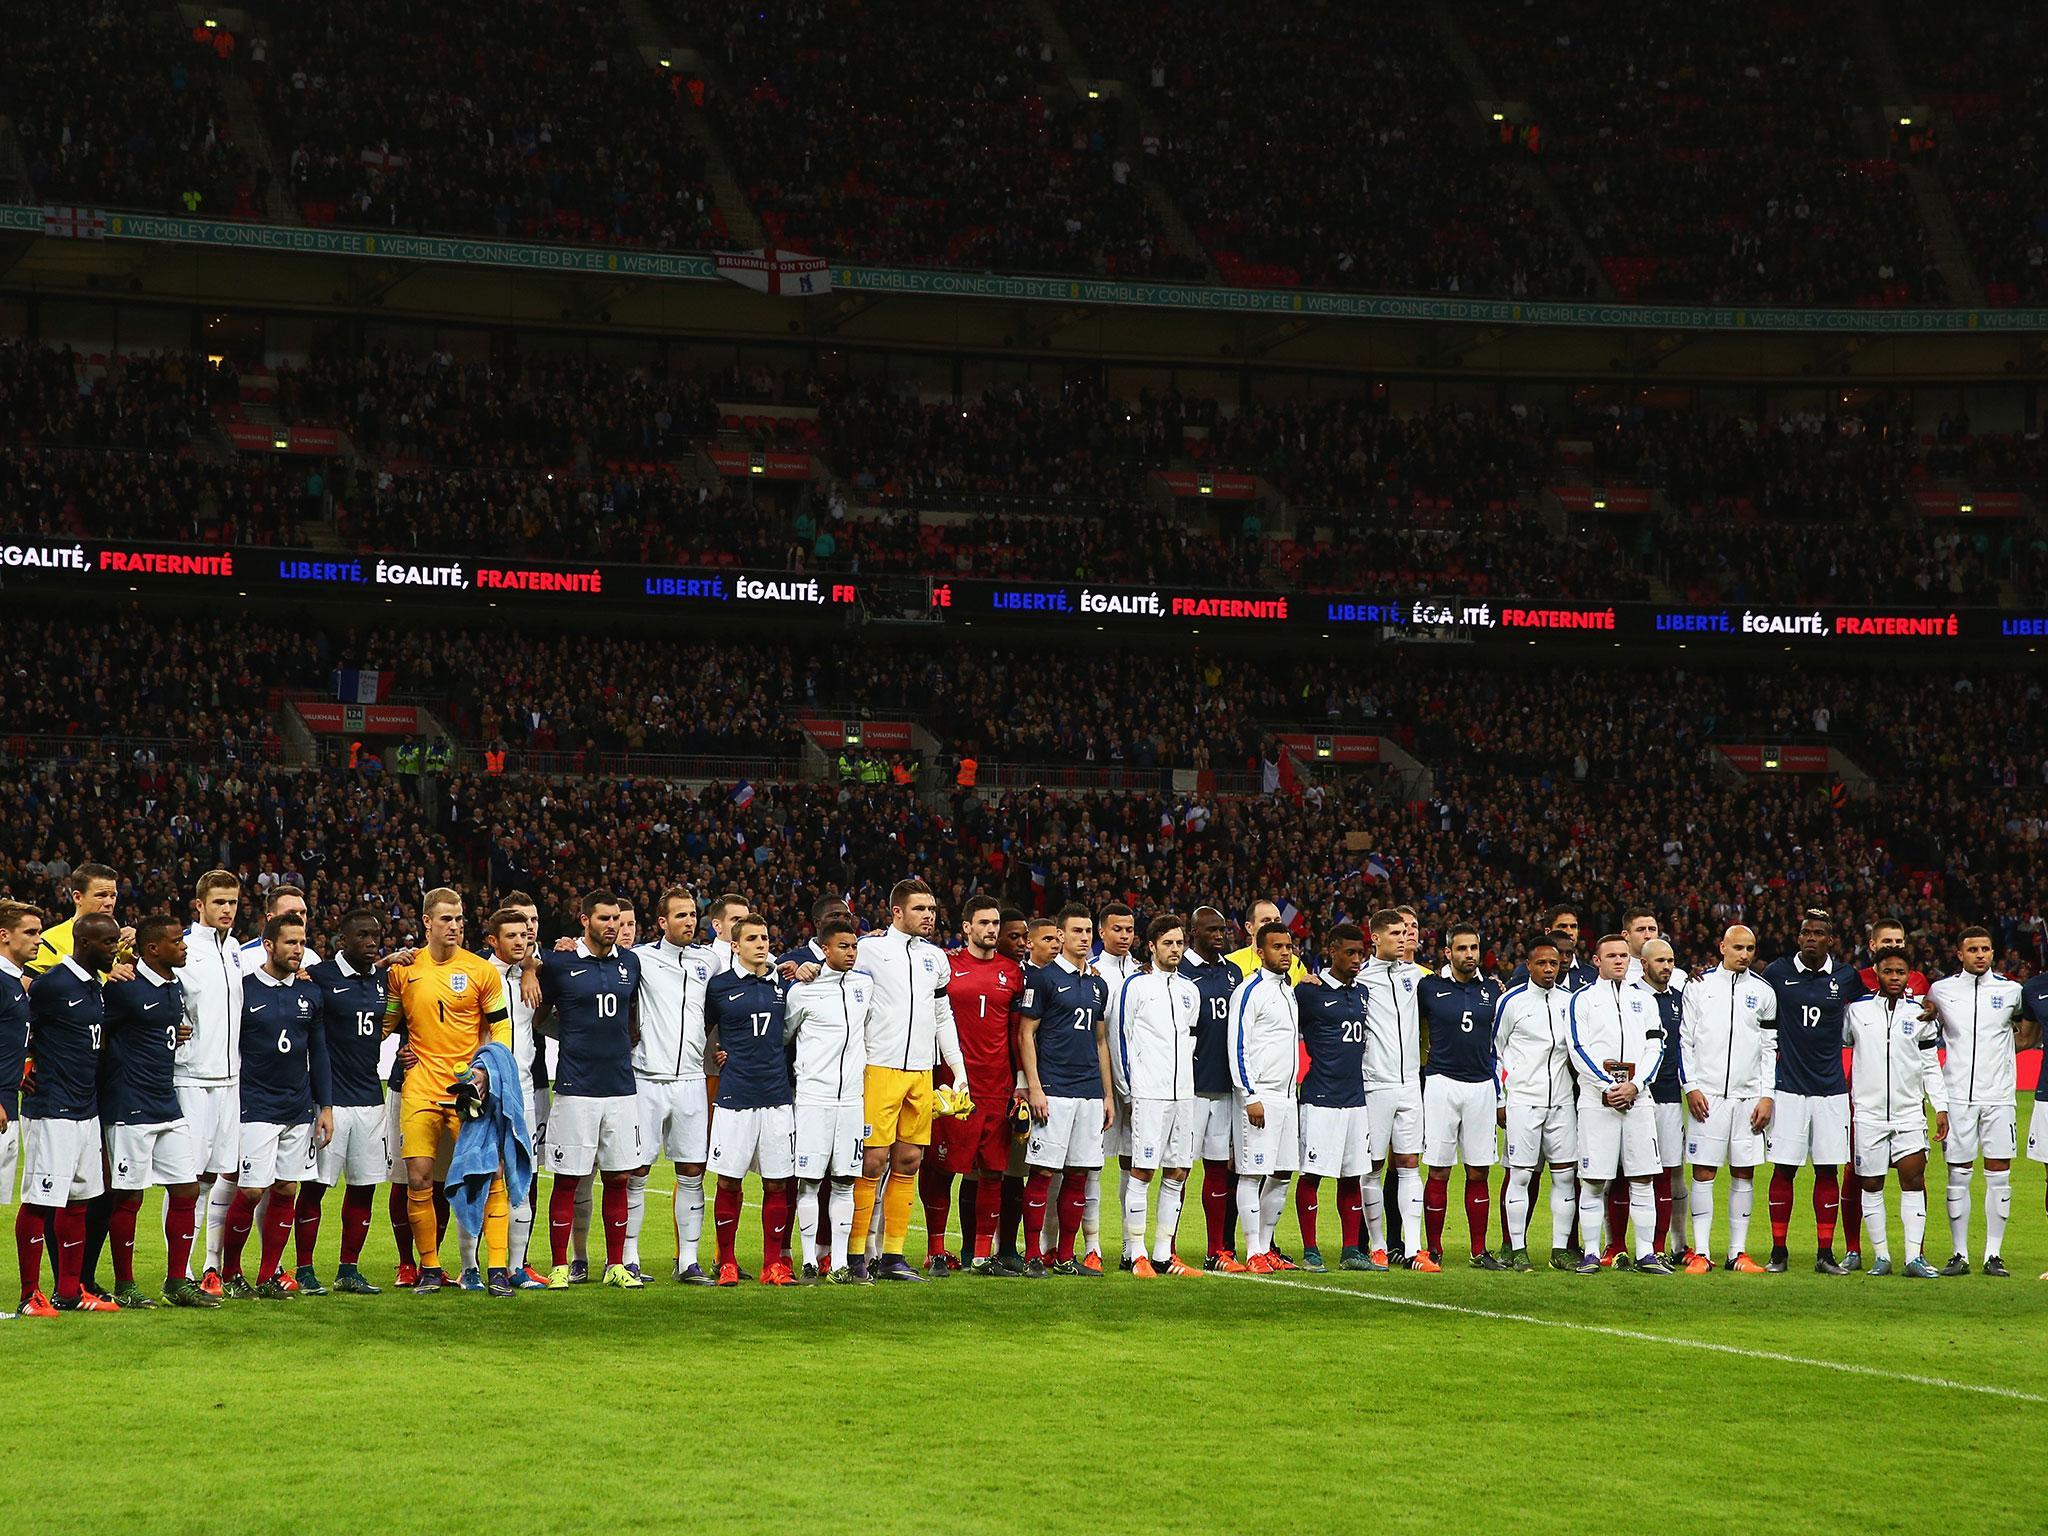 England and France pay tribute to those who were killed in the Paris attack